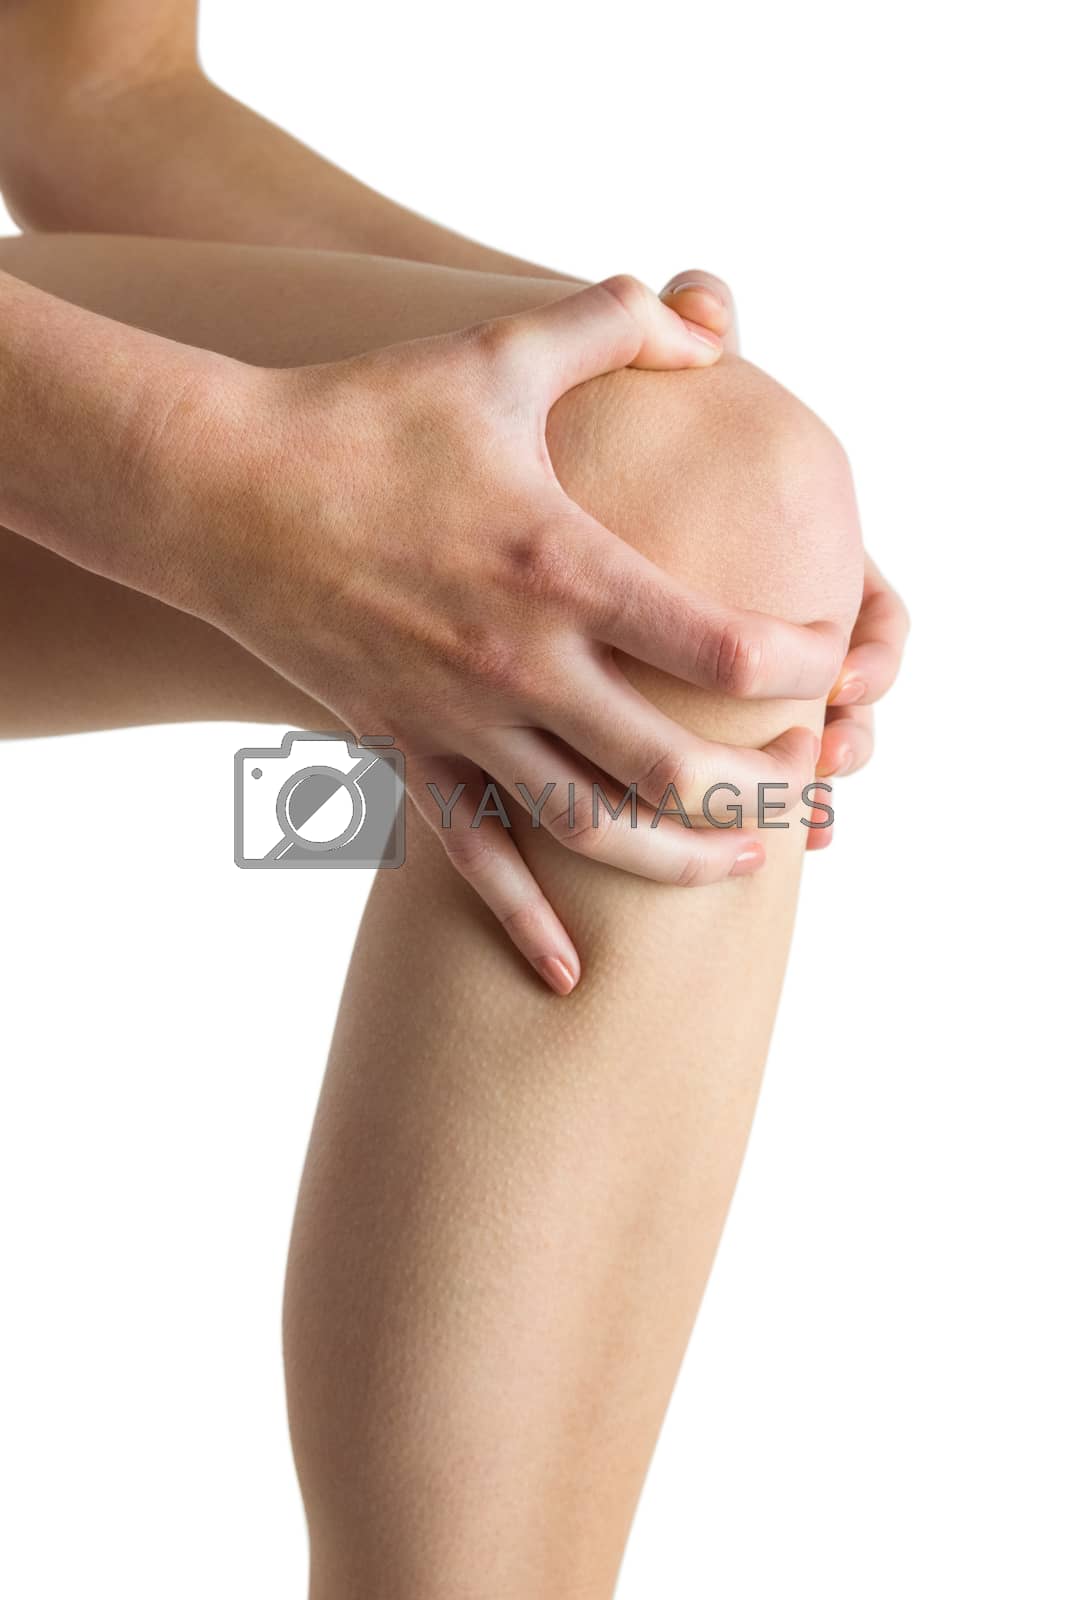 Royalty free image of Woman with knee injury by Wavebreakmedia